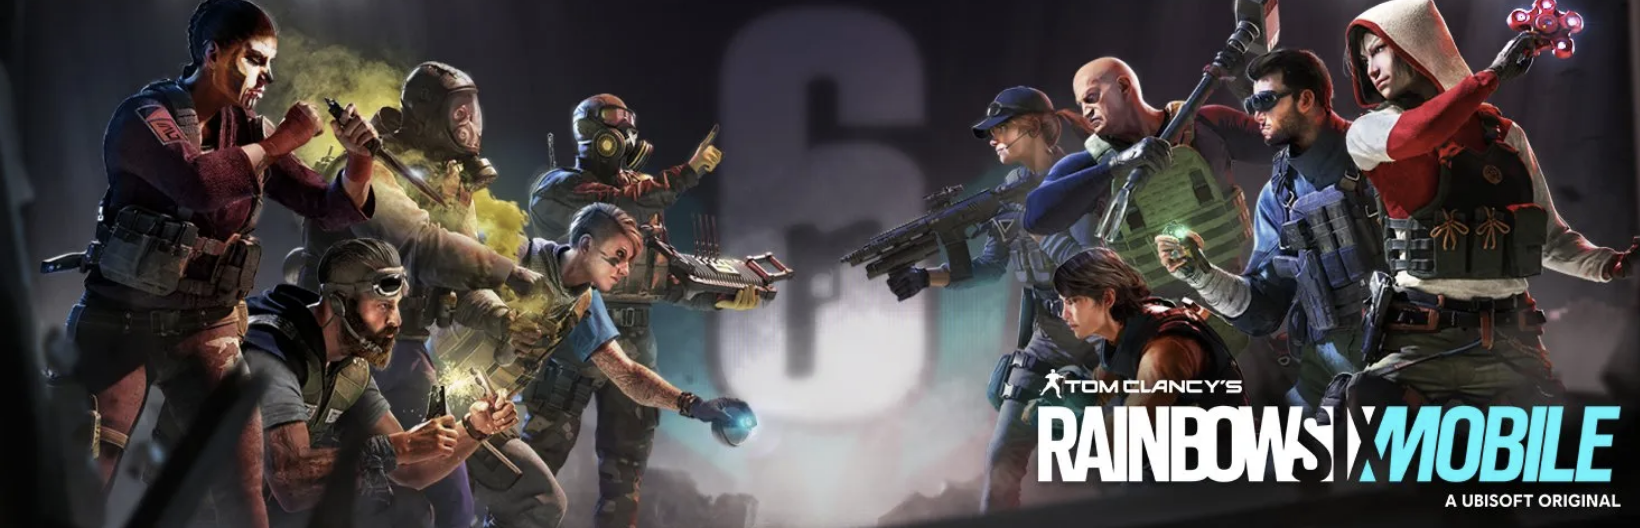 Rainbow Six Mobile closed beta test goes live: All details - Times of India